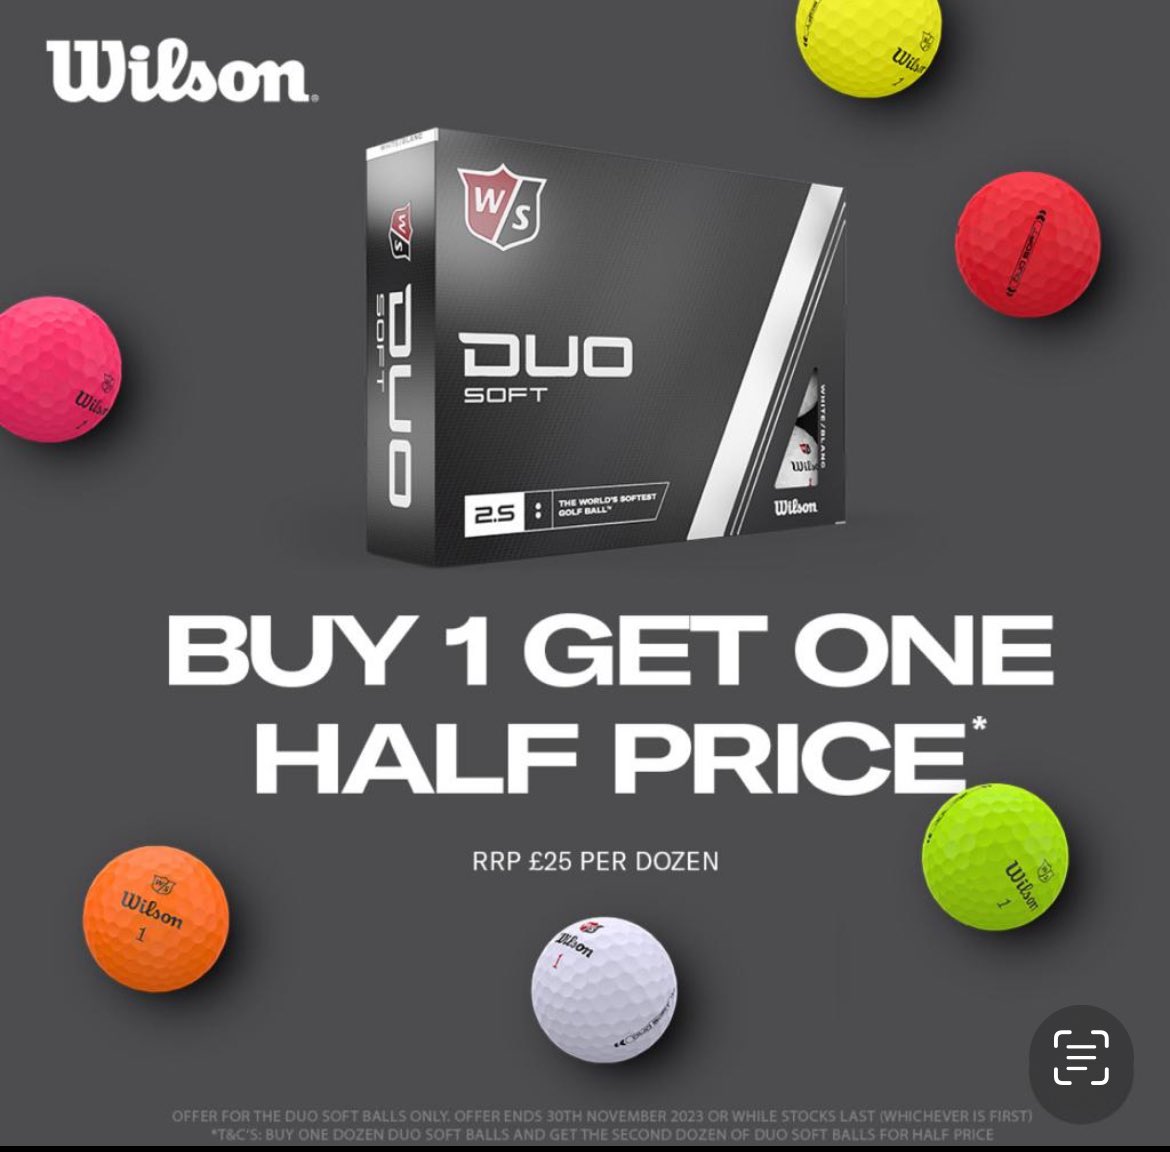 🟡🟠⚪️New in today and for your festive presents is the Wilson Golf Duo Soft balls on the amazing ‘Buy 1 Get One Half Price’ deal! That’s £35 for 2 dozen golf balls. Available while stocks last ⚪️🟠🟡 #wilson #golfballs #duosoft #multideal #christmas #golfdeals